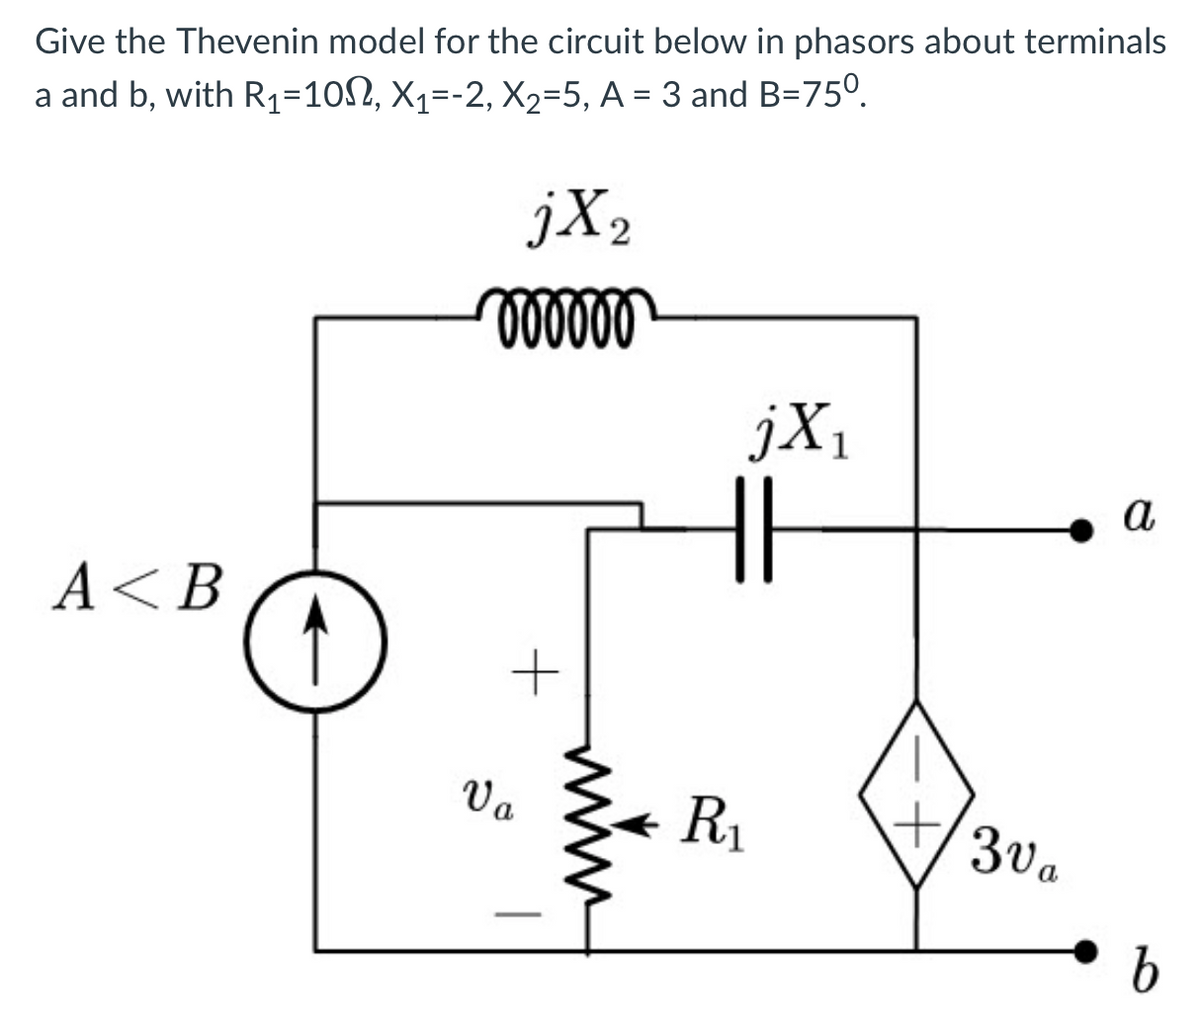 Give the Thevenin model for the circuit below in phasors about terminals
a and b, with R₁=10N, X₁=-2, X₂=5, A = 3 and B=75⁰.
A <B
jX₂
000000
Va
www
jX₁
HH
R₁
30a
a
b